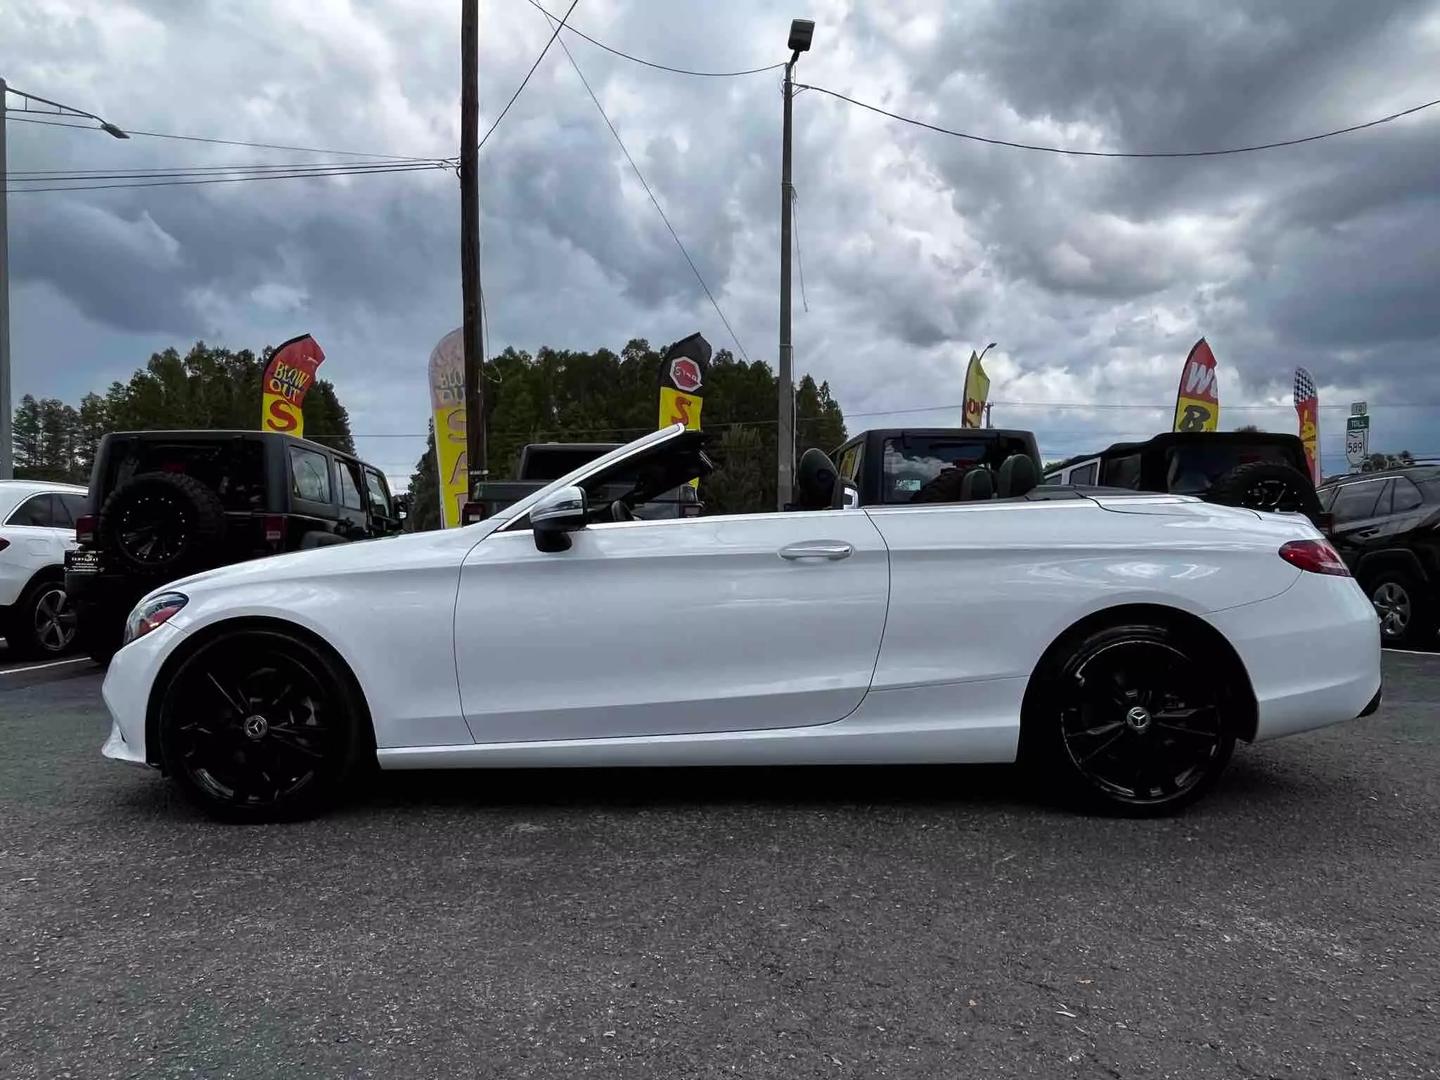 Used 2019 Mercedes-Benz C-Class Cabriolet C300 with VIN WDDWK8DB6KF803335 for sale in Tampa, FL